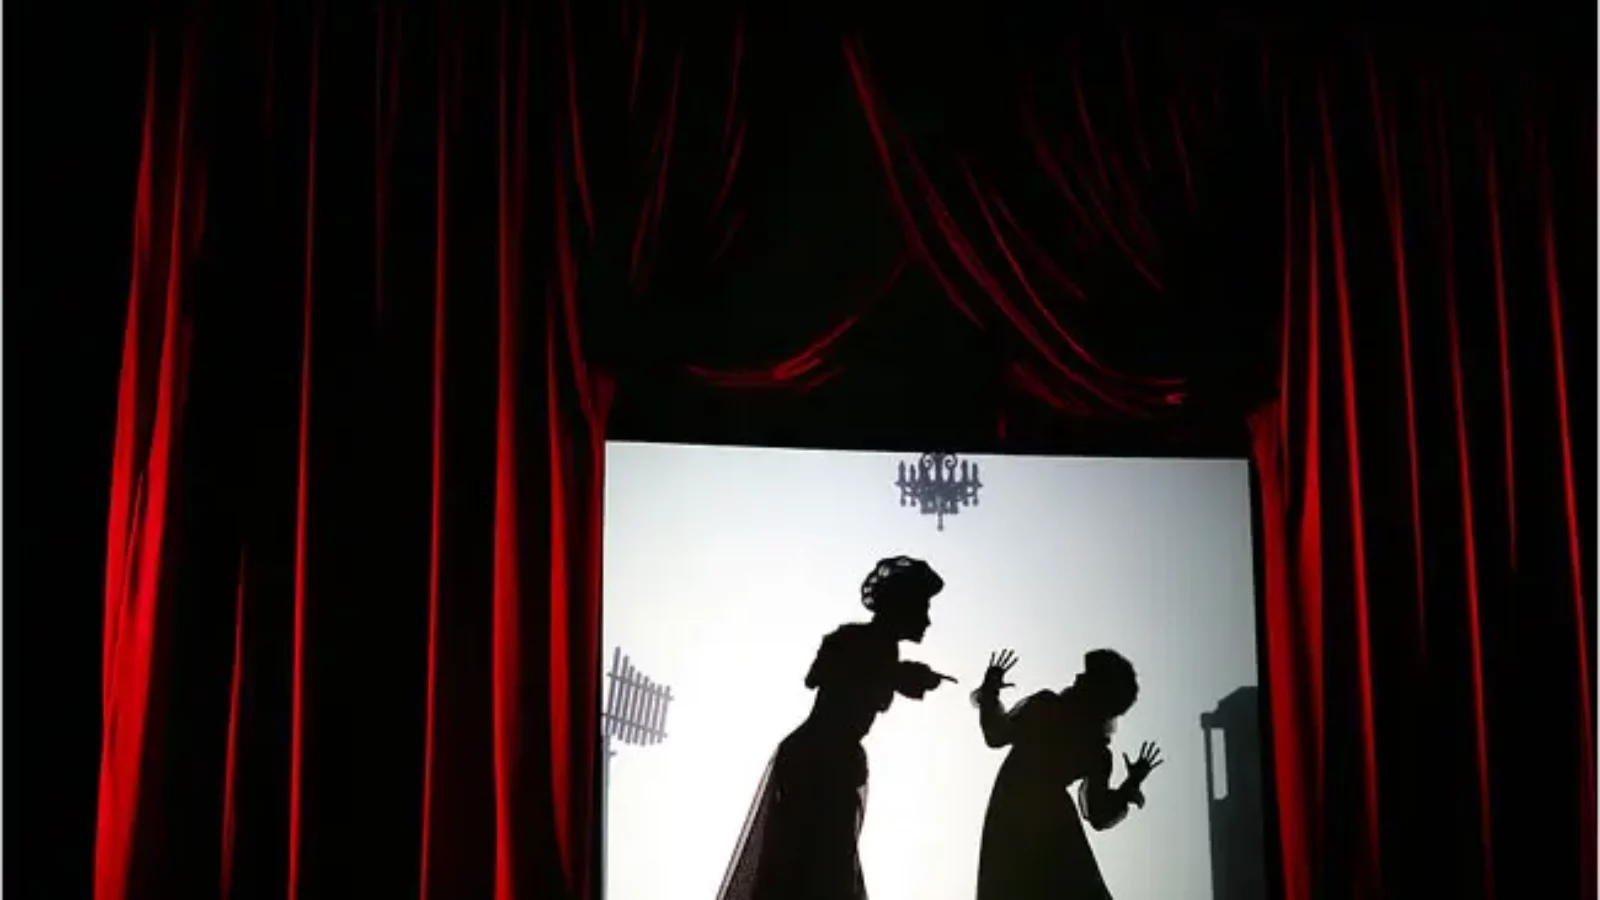 A silhouette of two people arguing is framed by red velvet curtains